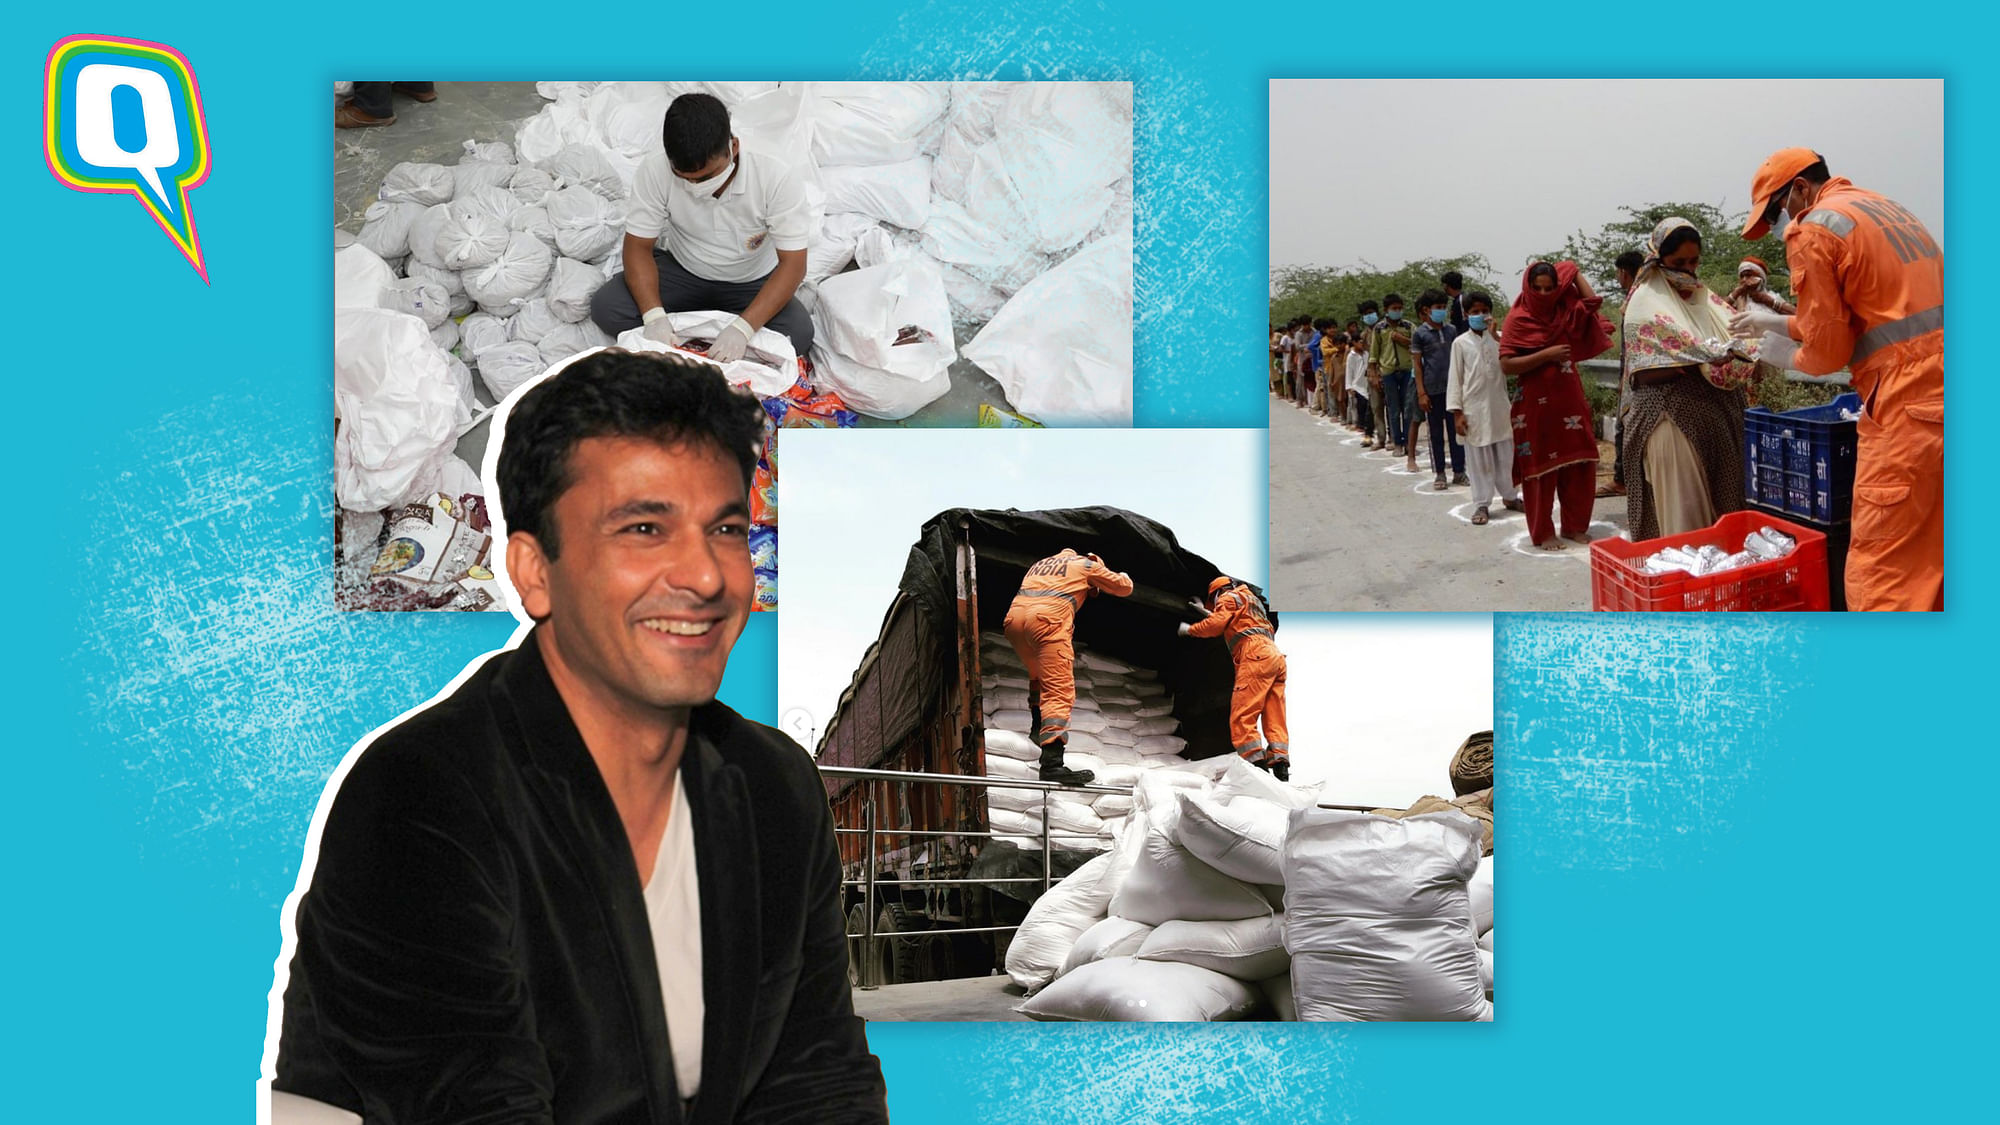 Celebrity chef Vikas Khanna launches food drive to serve 2 millions meals in a single day.